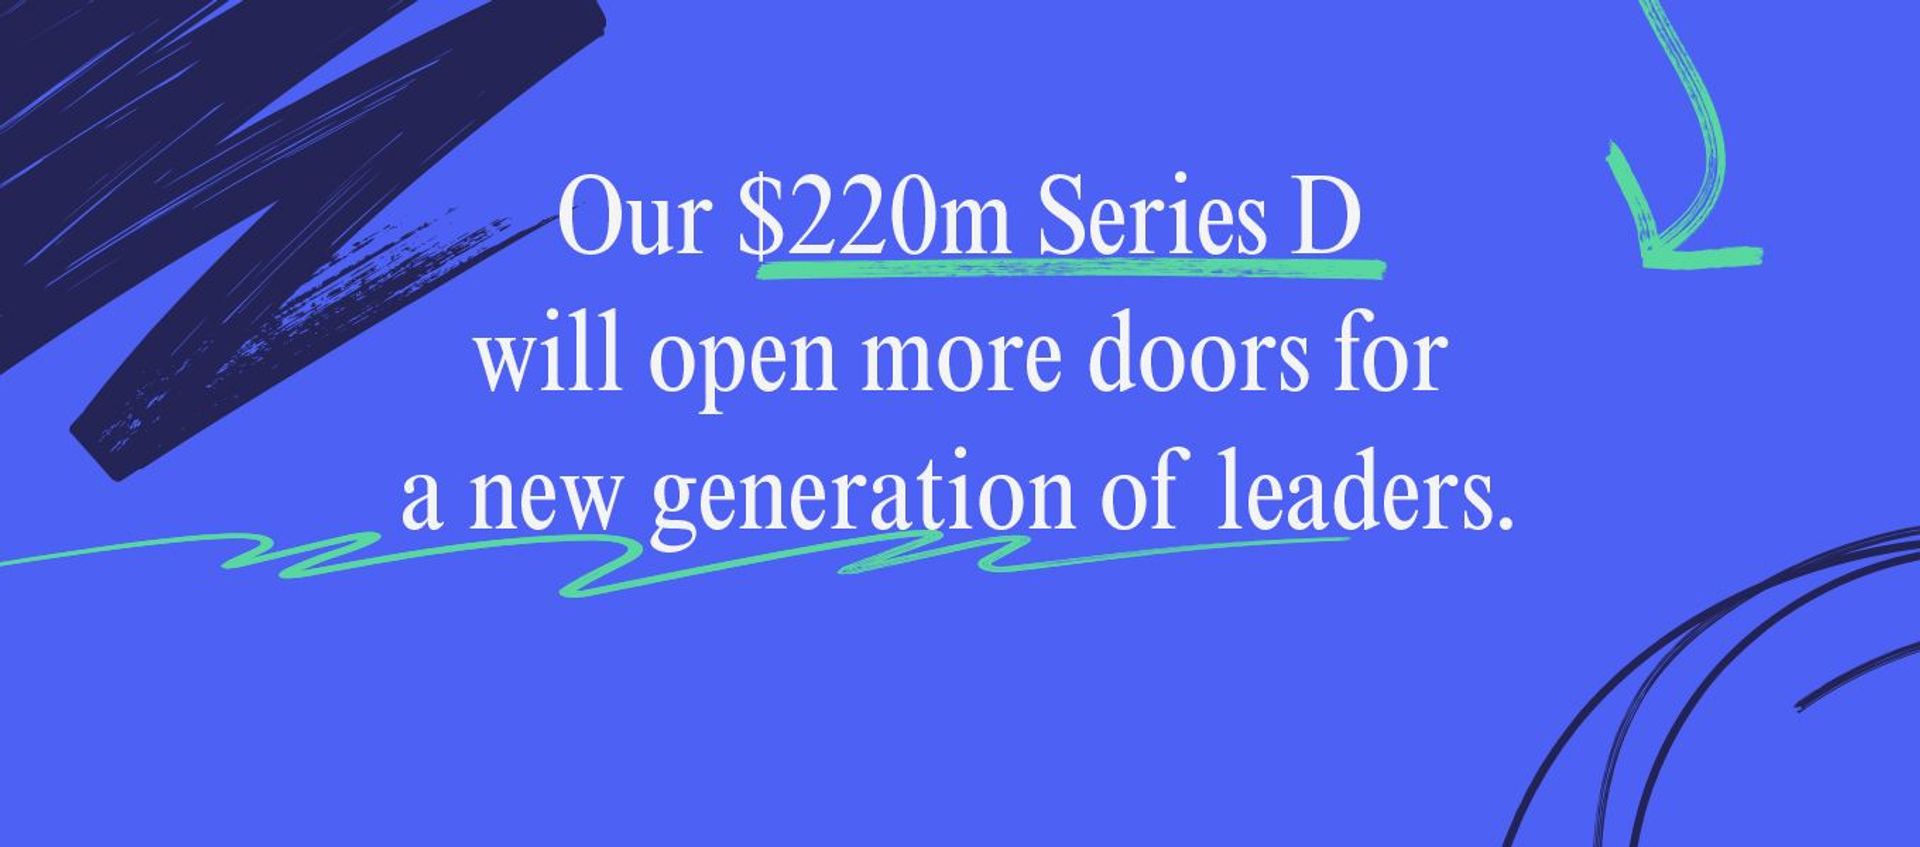 A blue and green graphic with a text overlay: "Our $220m Series D will open more doors for a new generation of leaders."